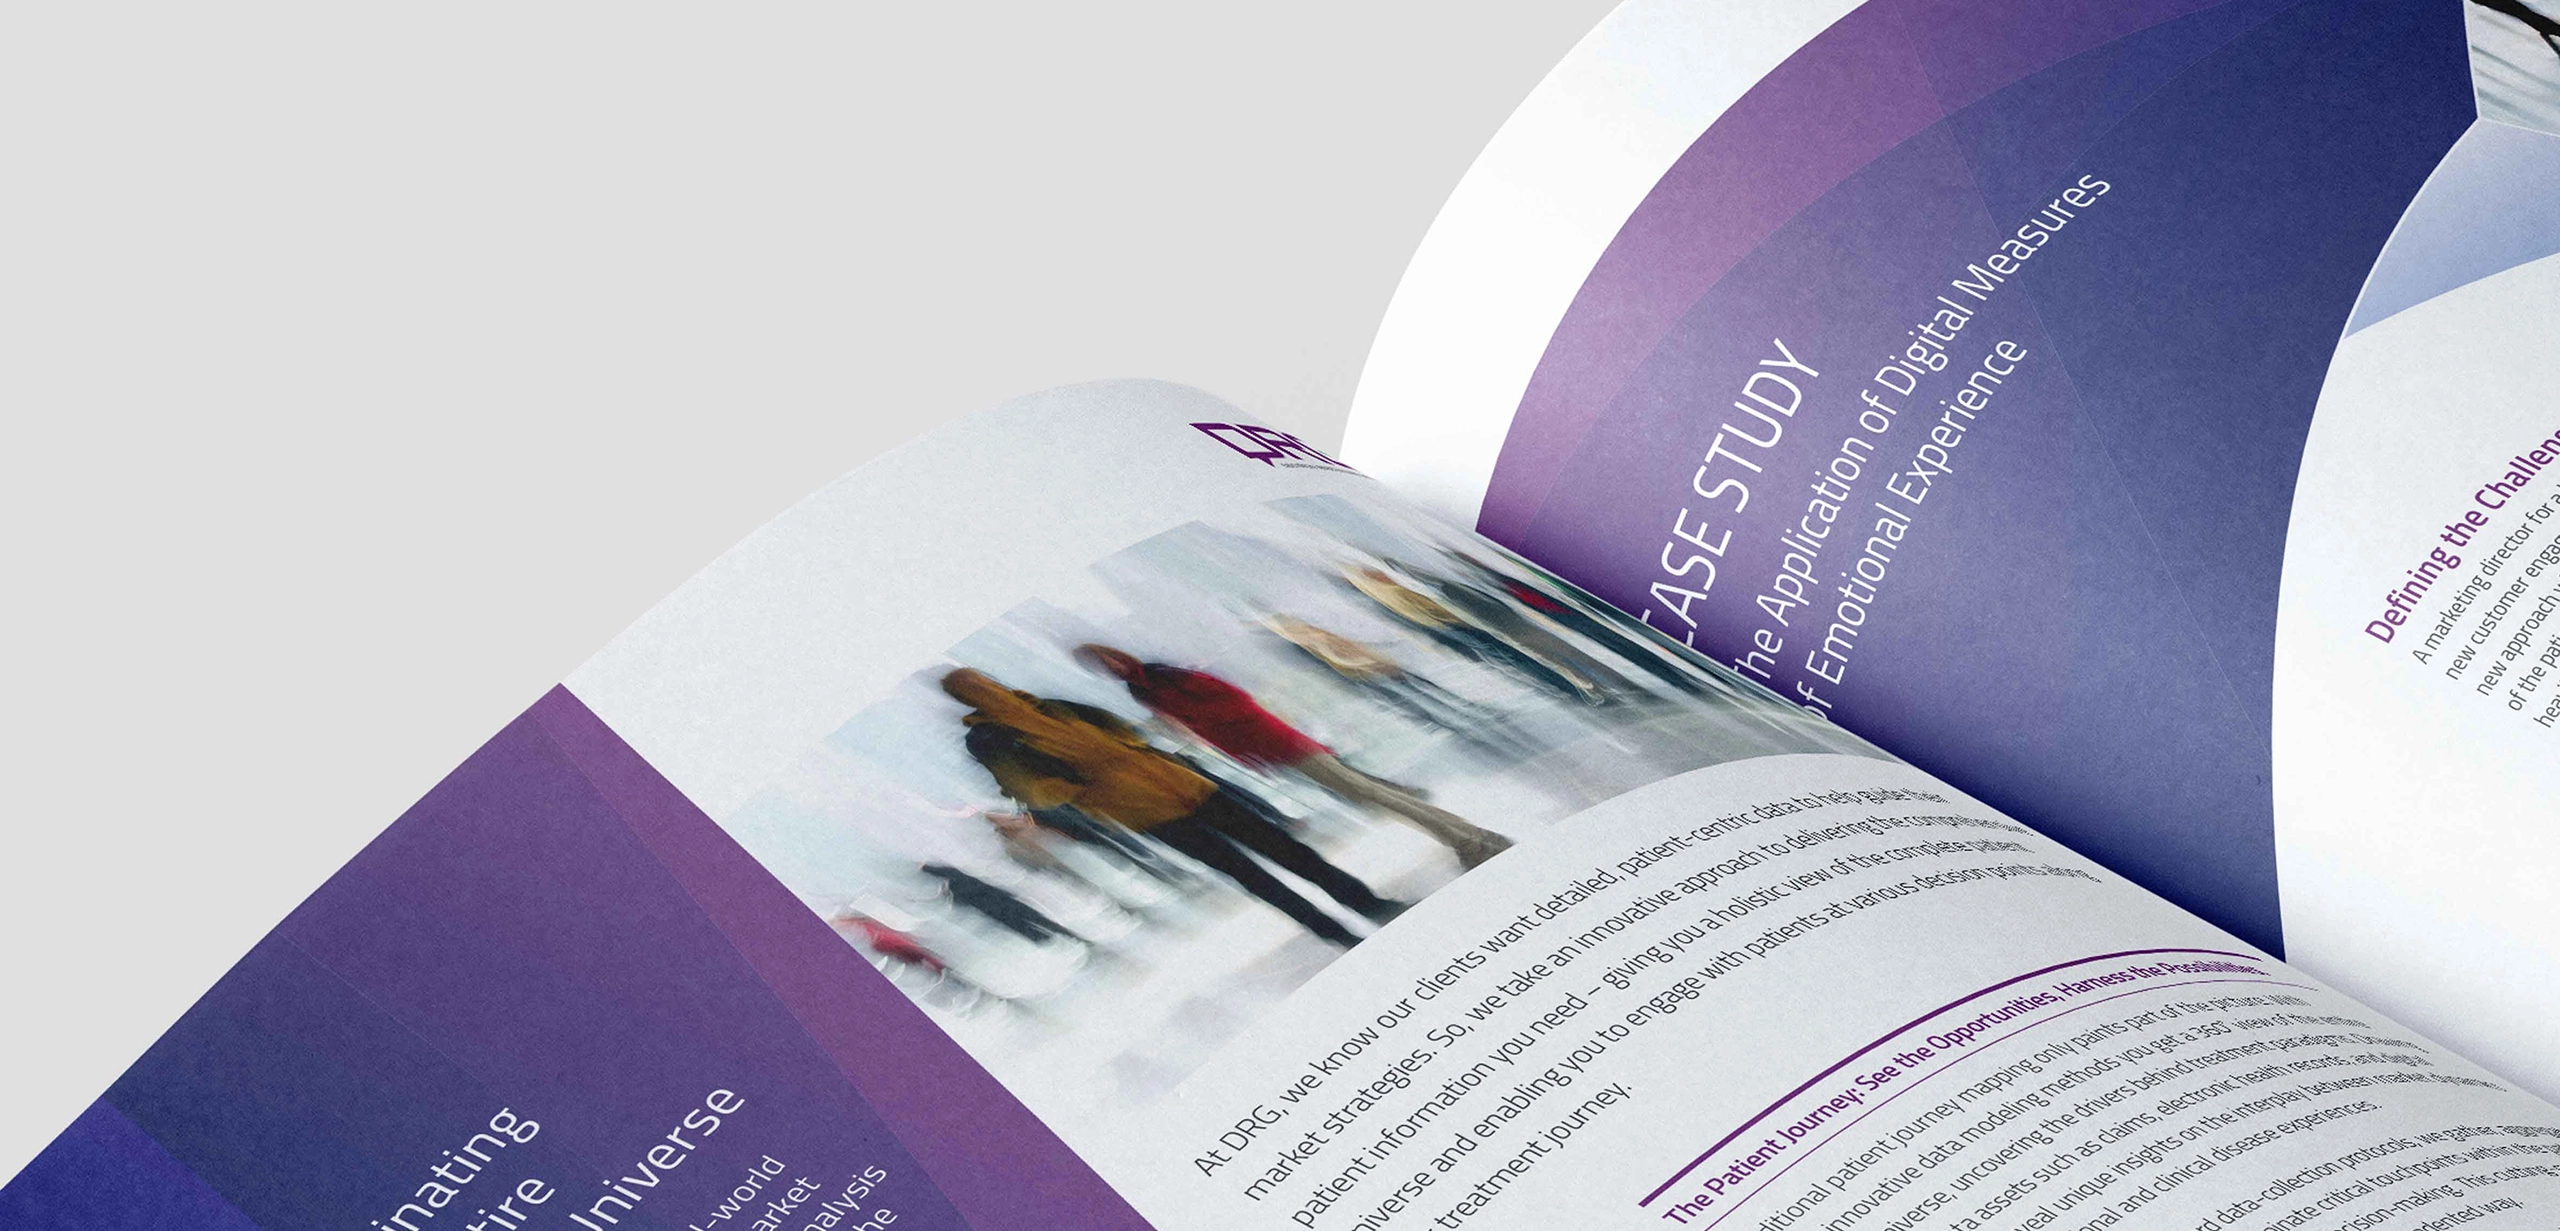 Sales sheet branding and design for a global information and technology services company